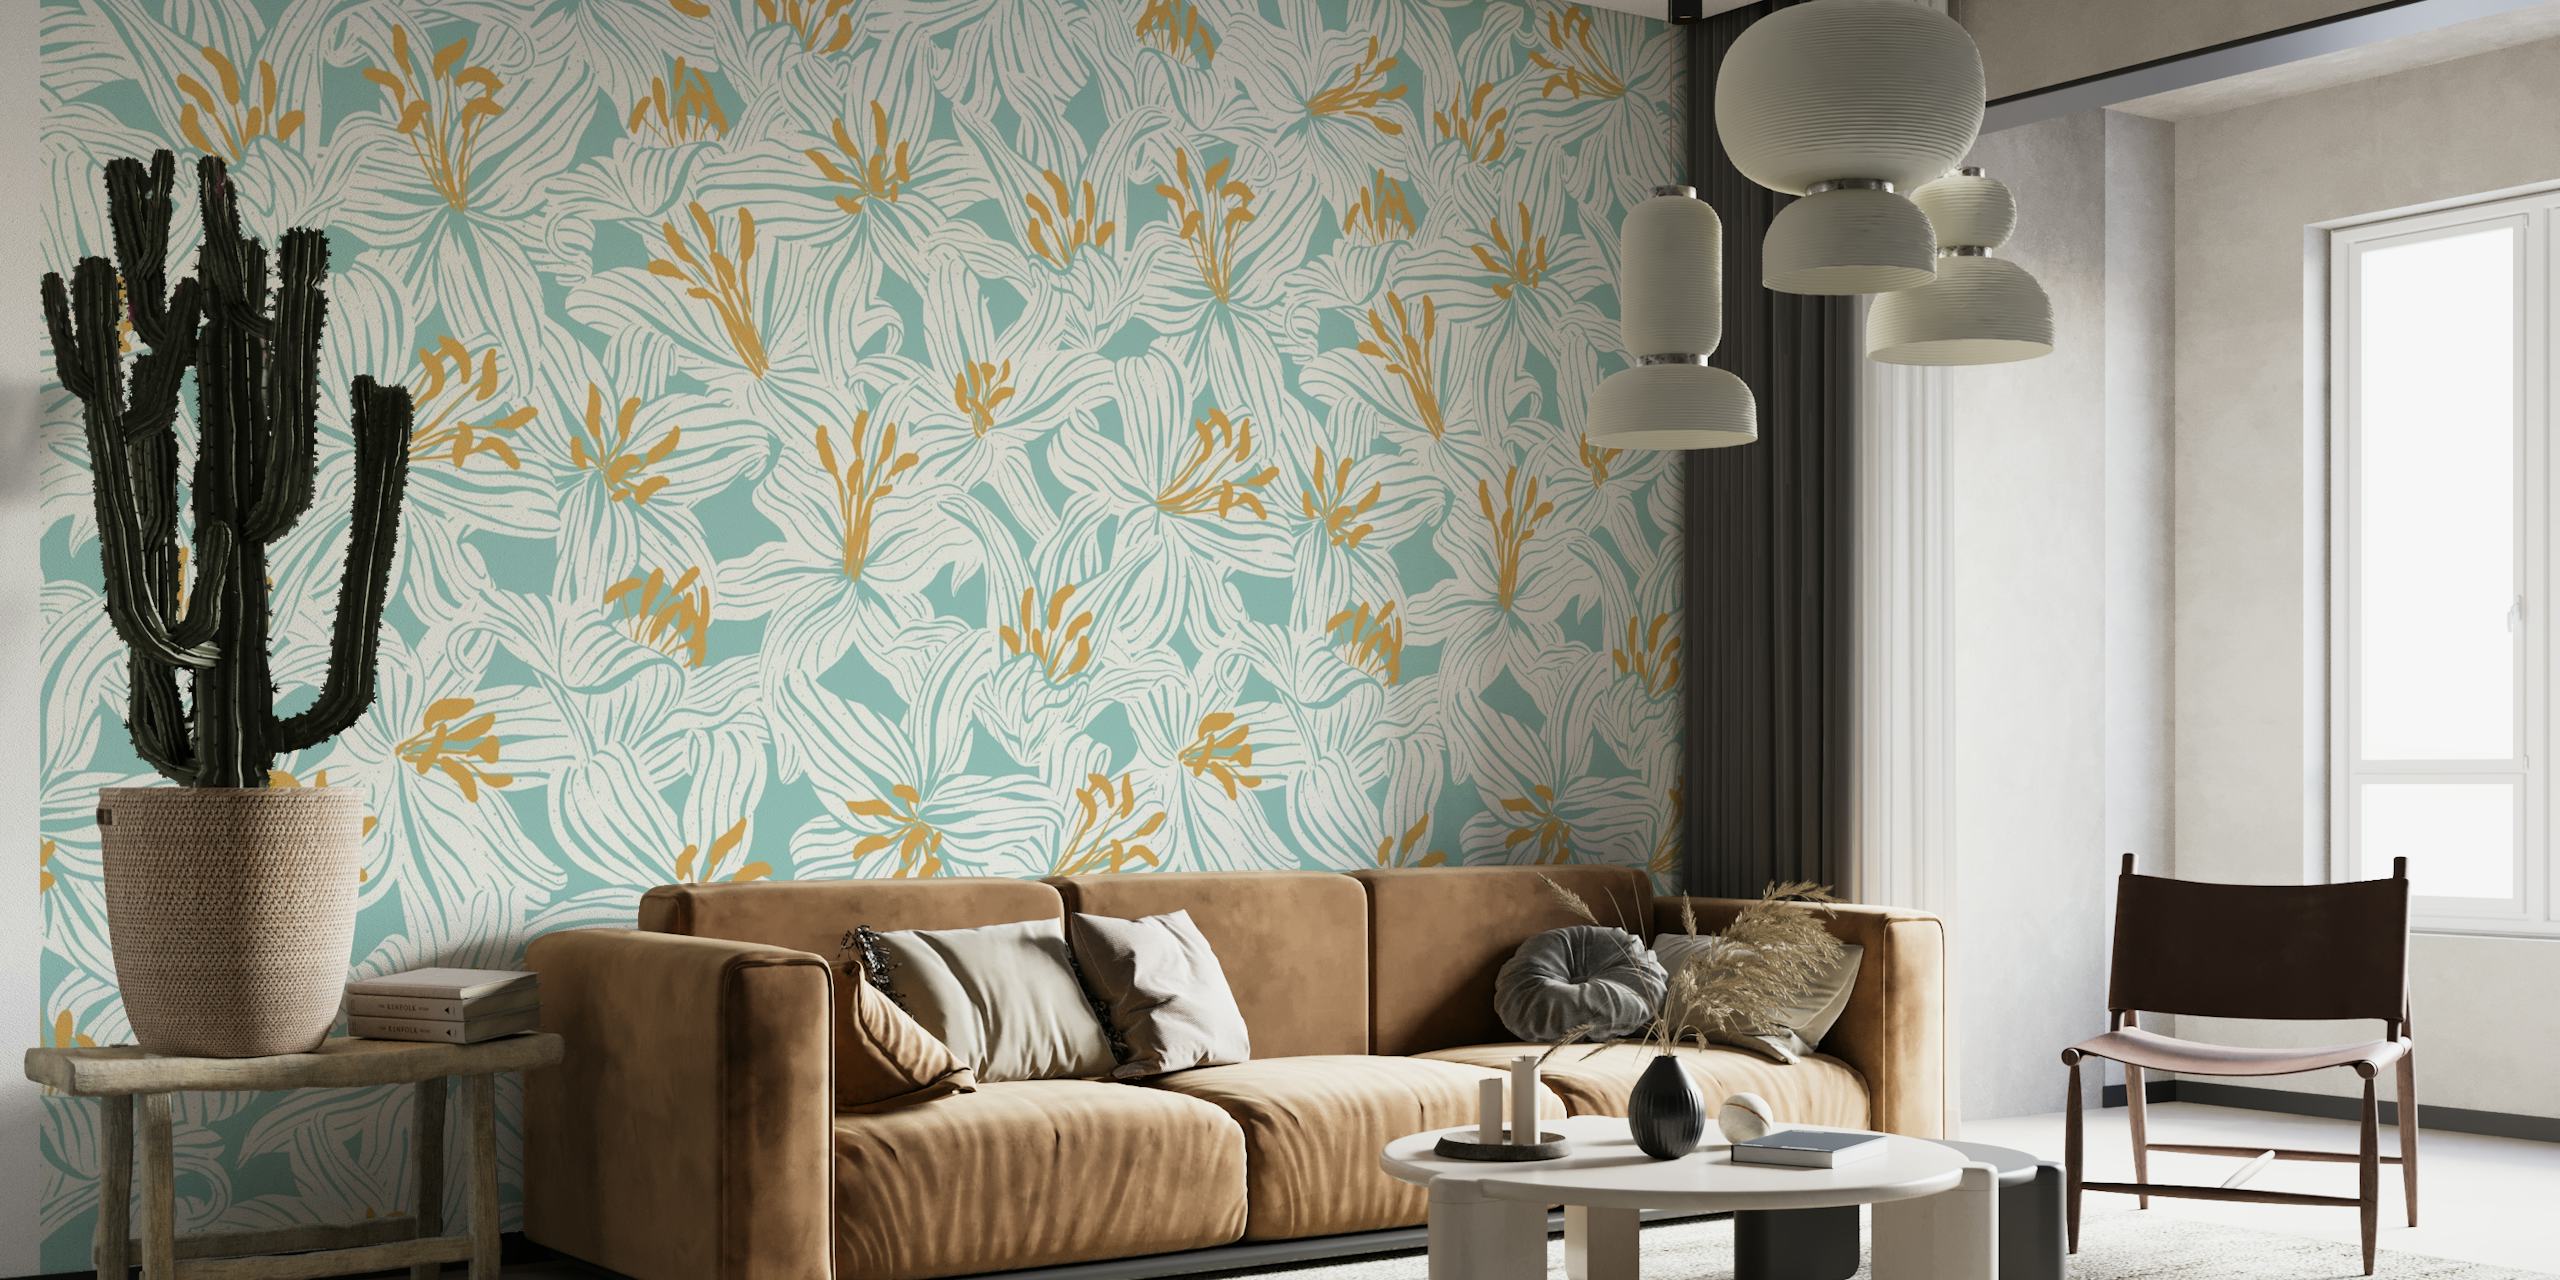 Elegant lilies and foliage wall mural design